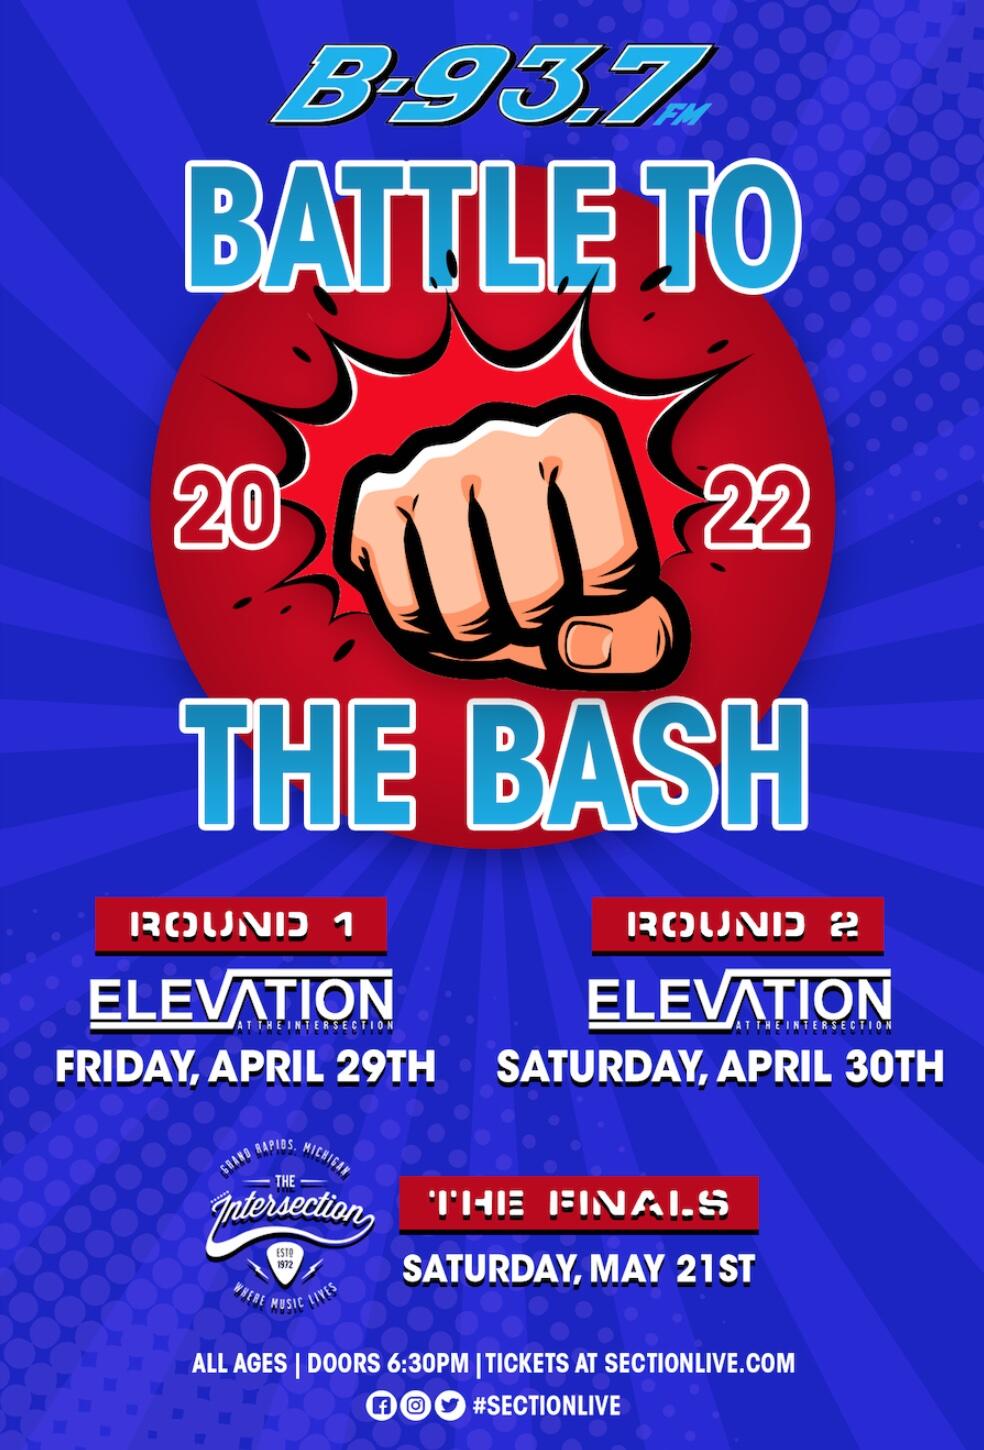 B93 Battle to the Bash 2022 – Round 2